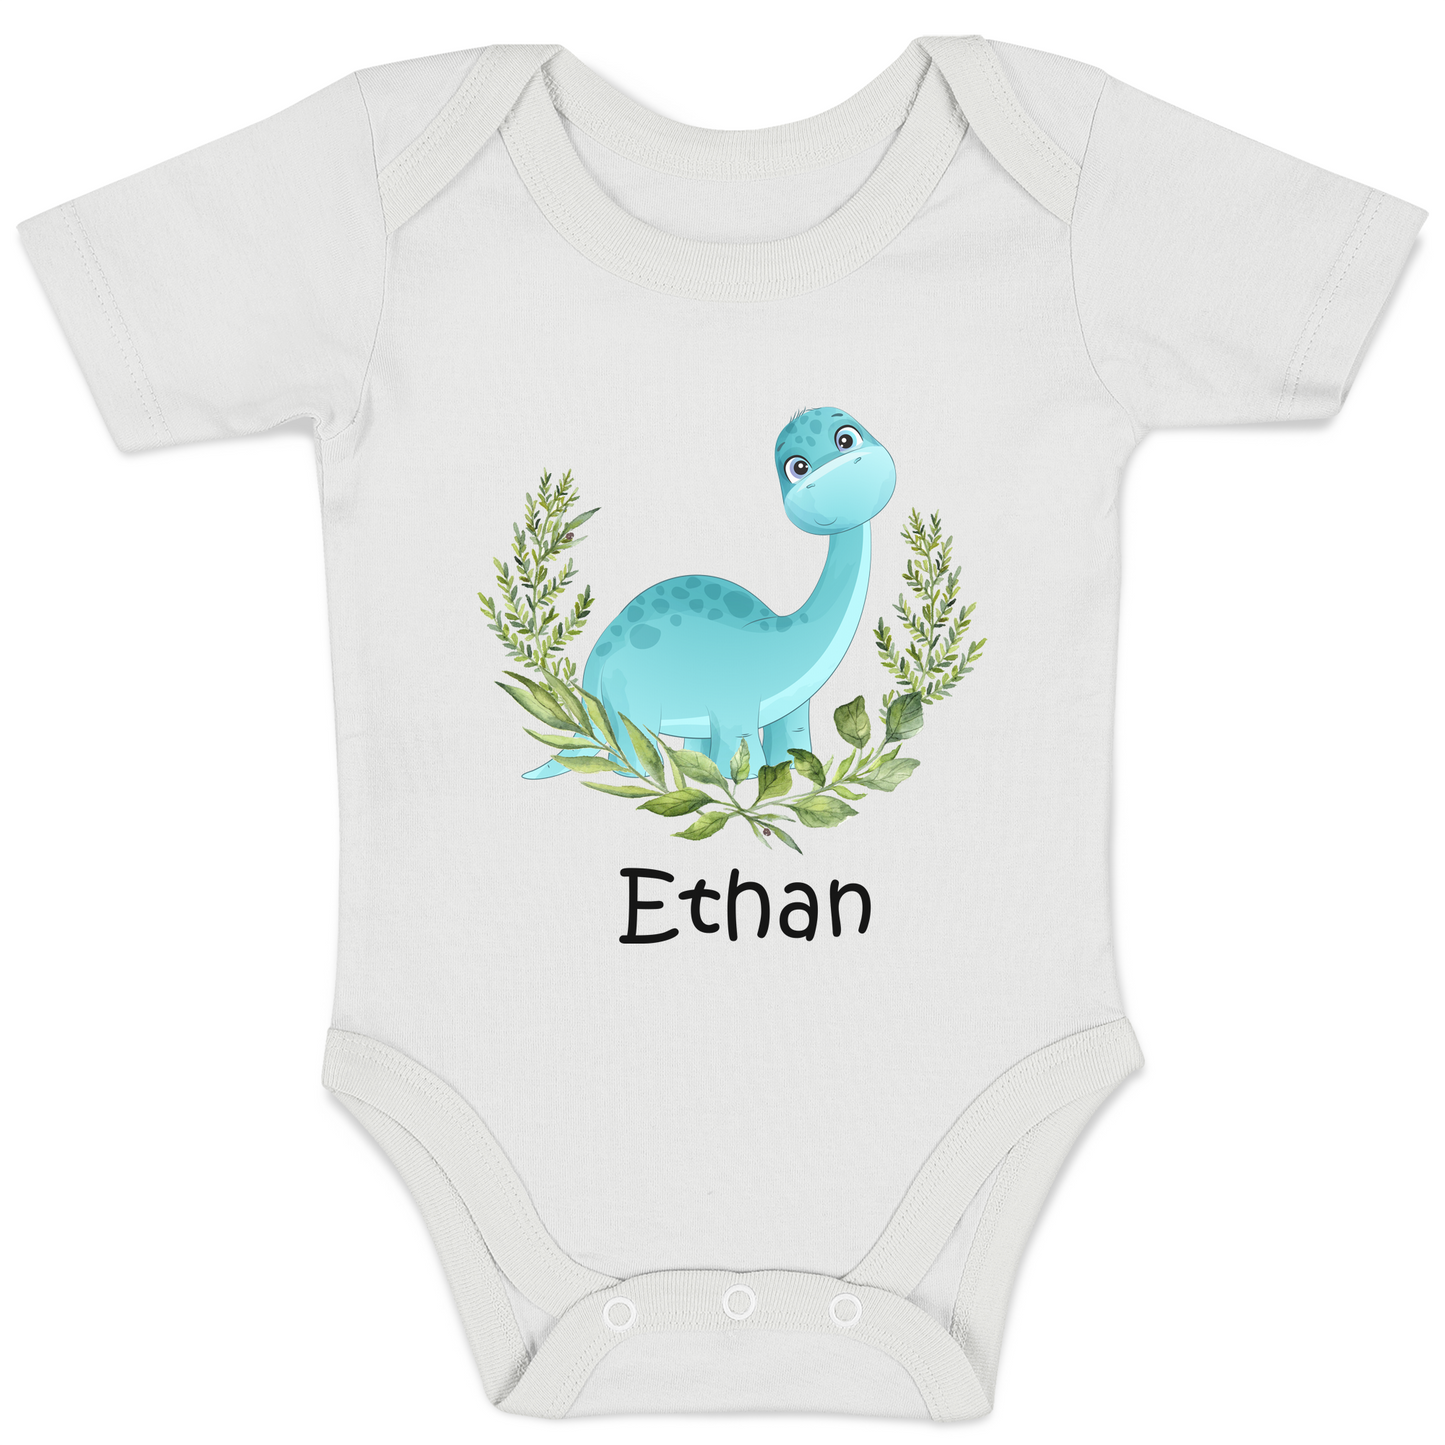 [Personalized] Endanzoo Organic Short Sleeves Baby Bodysuit - Little Dinosaurs